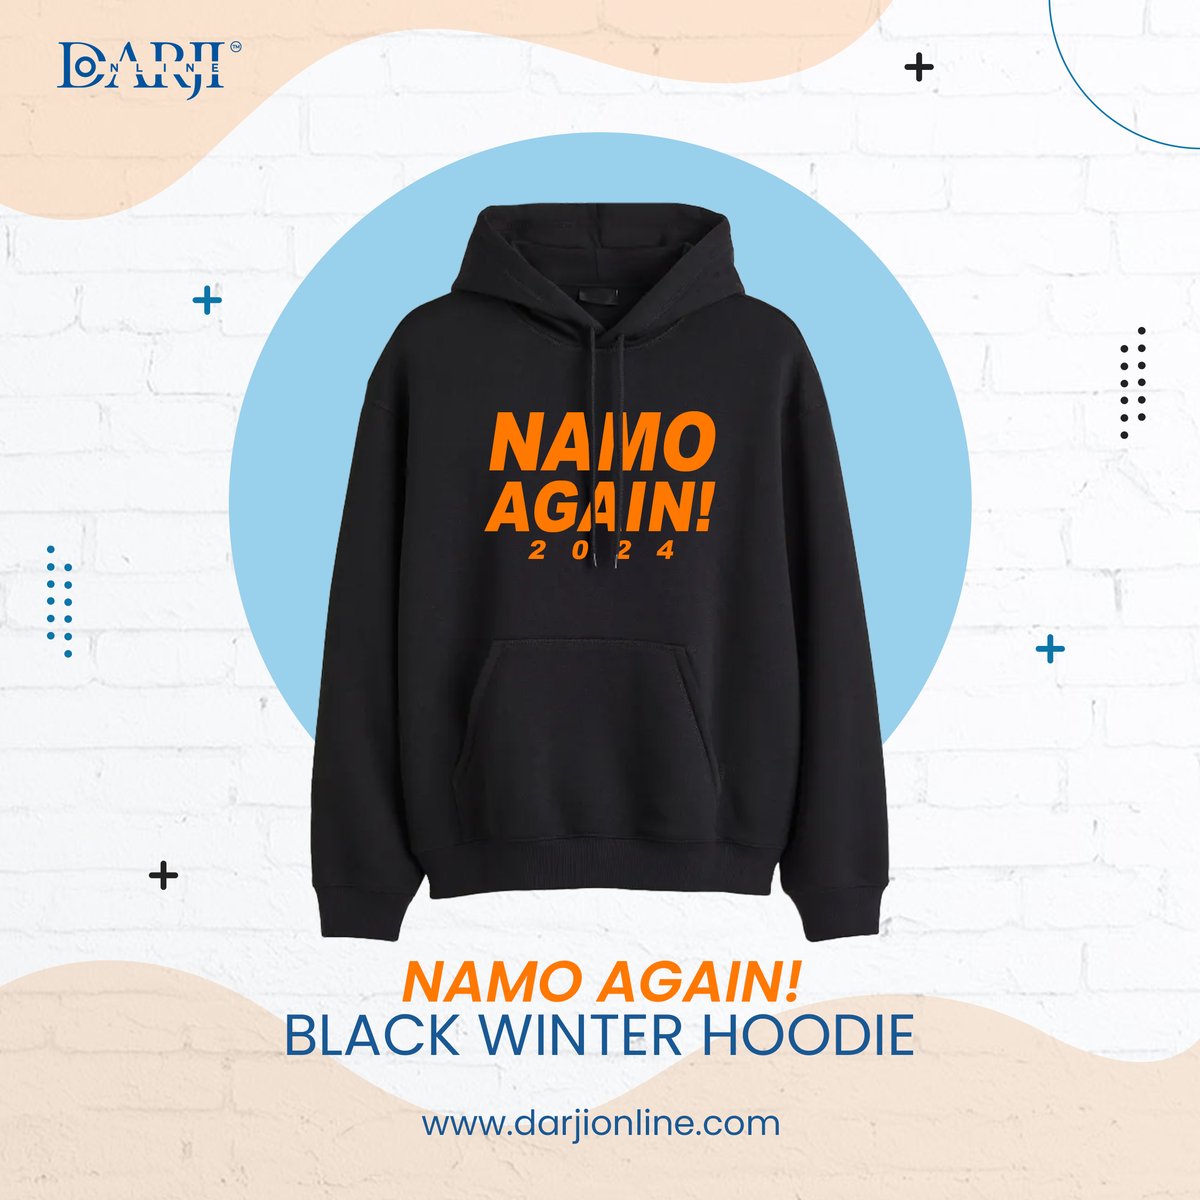 Stay cozy in the season's coolest attire! Introducing our 'NAMO AGAIN!' Black Winter Hoodie - where style meets comfort effortlessly. ❄️🖤 #WinterEssentials #NamoAgain #FashionForward